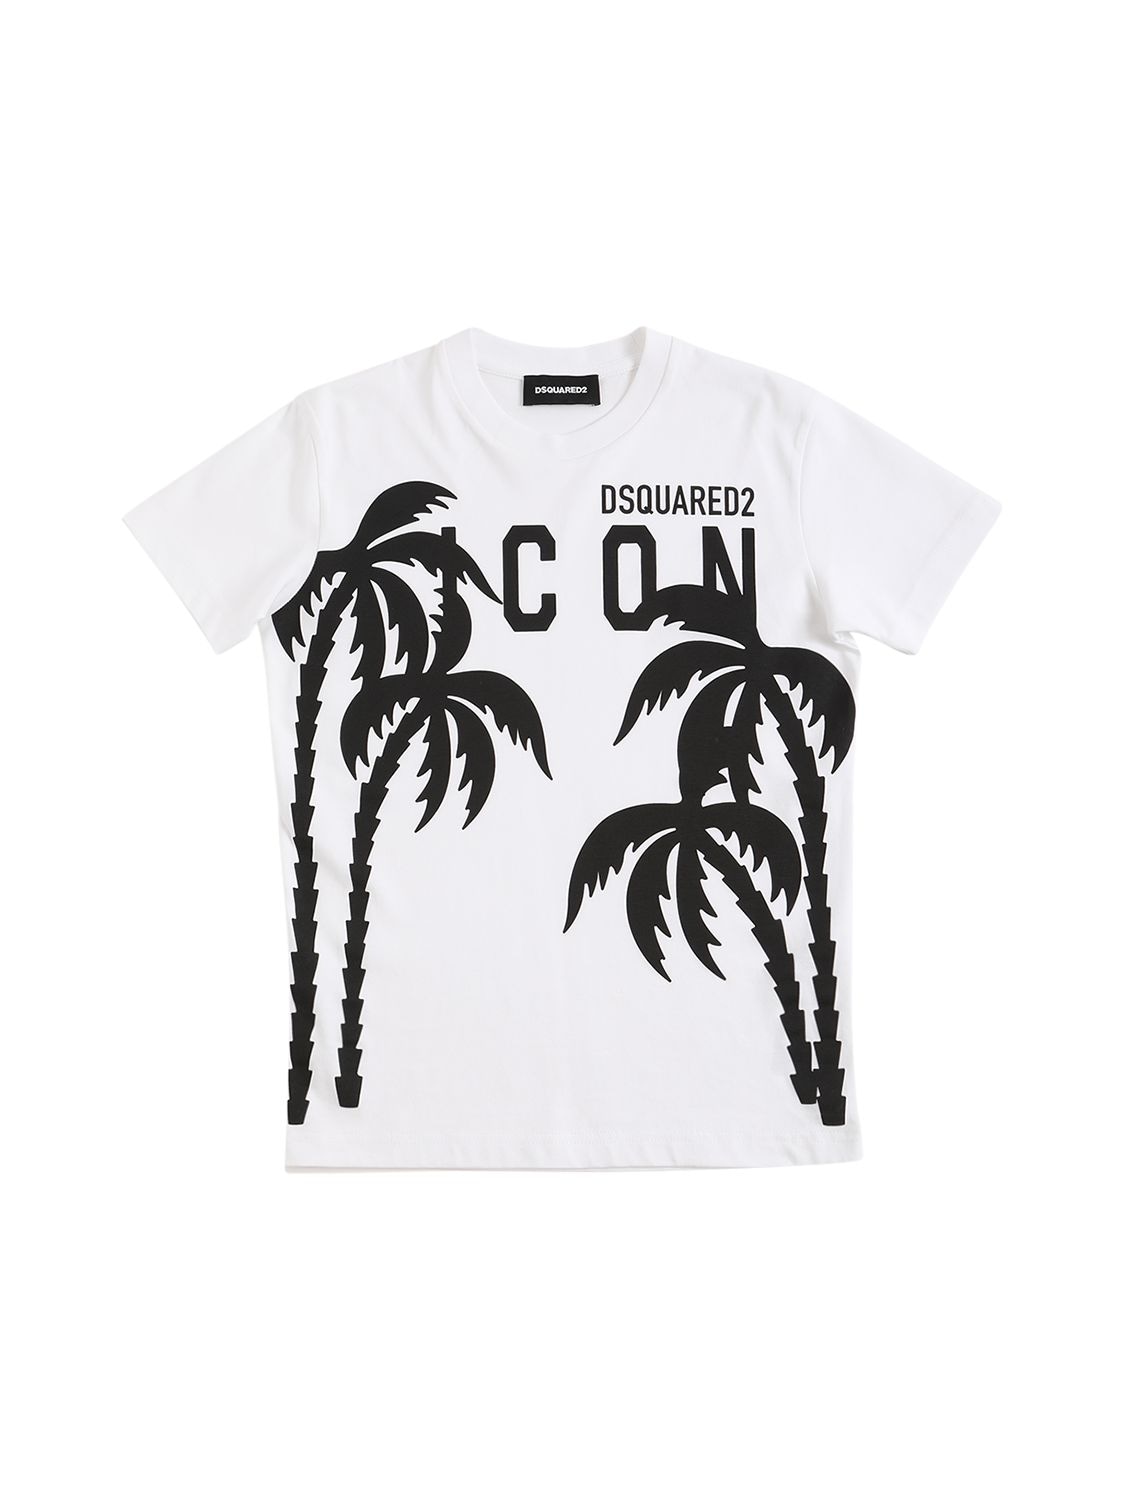 Dsquared2 Kids' Printed Cotton Jersey T-shirt In White